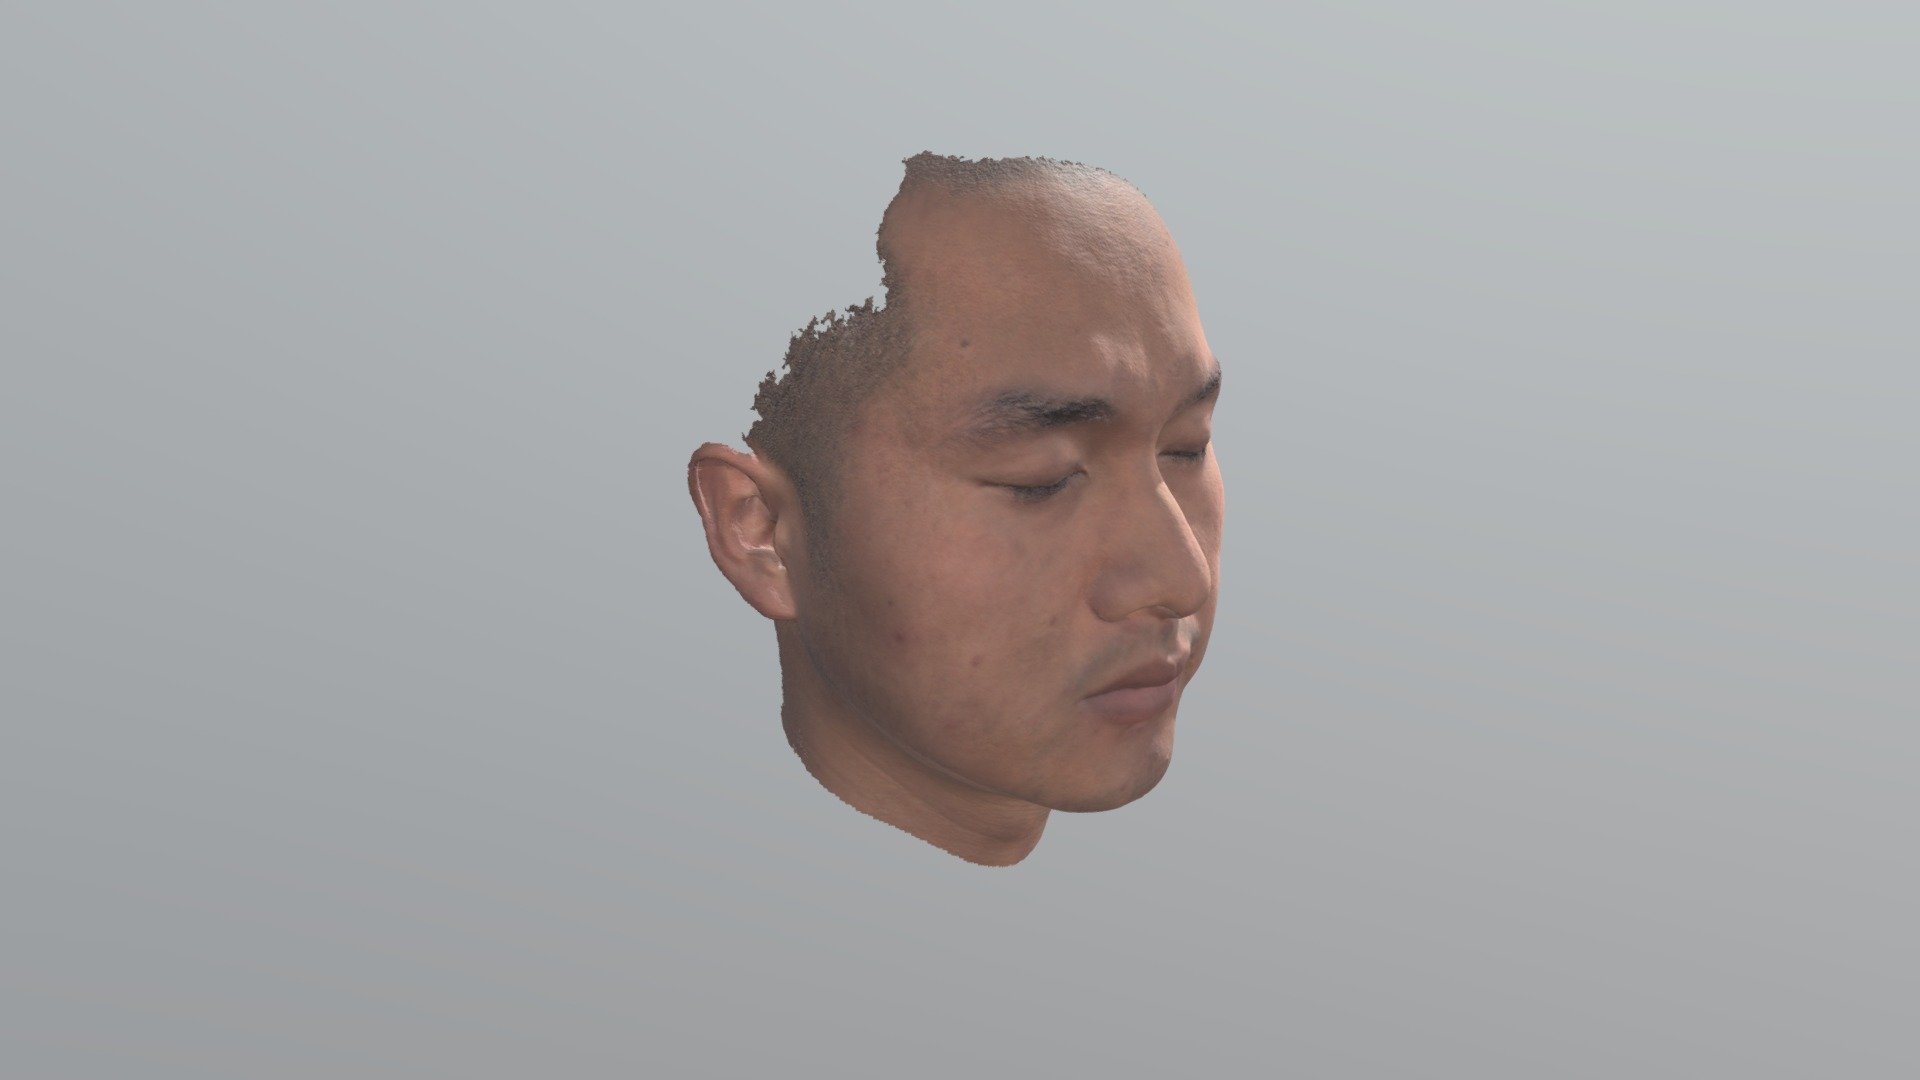 Face Download Free 3d Model By Thunk3d 3d Scanner Lily Qin1 [c410030] Sketchfab